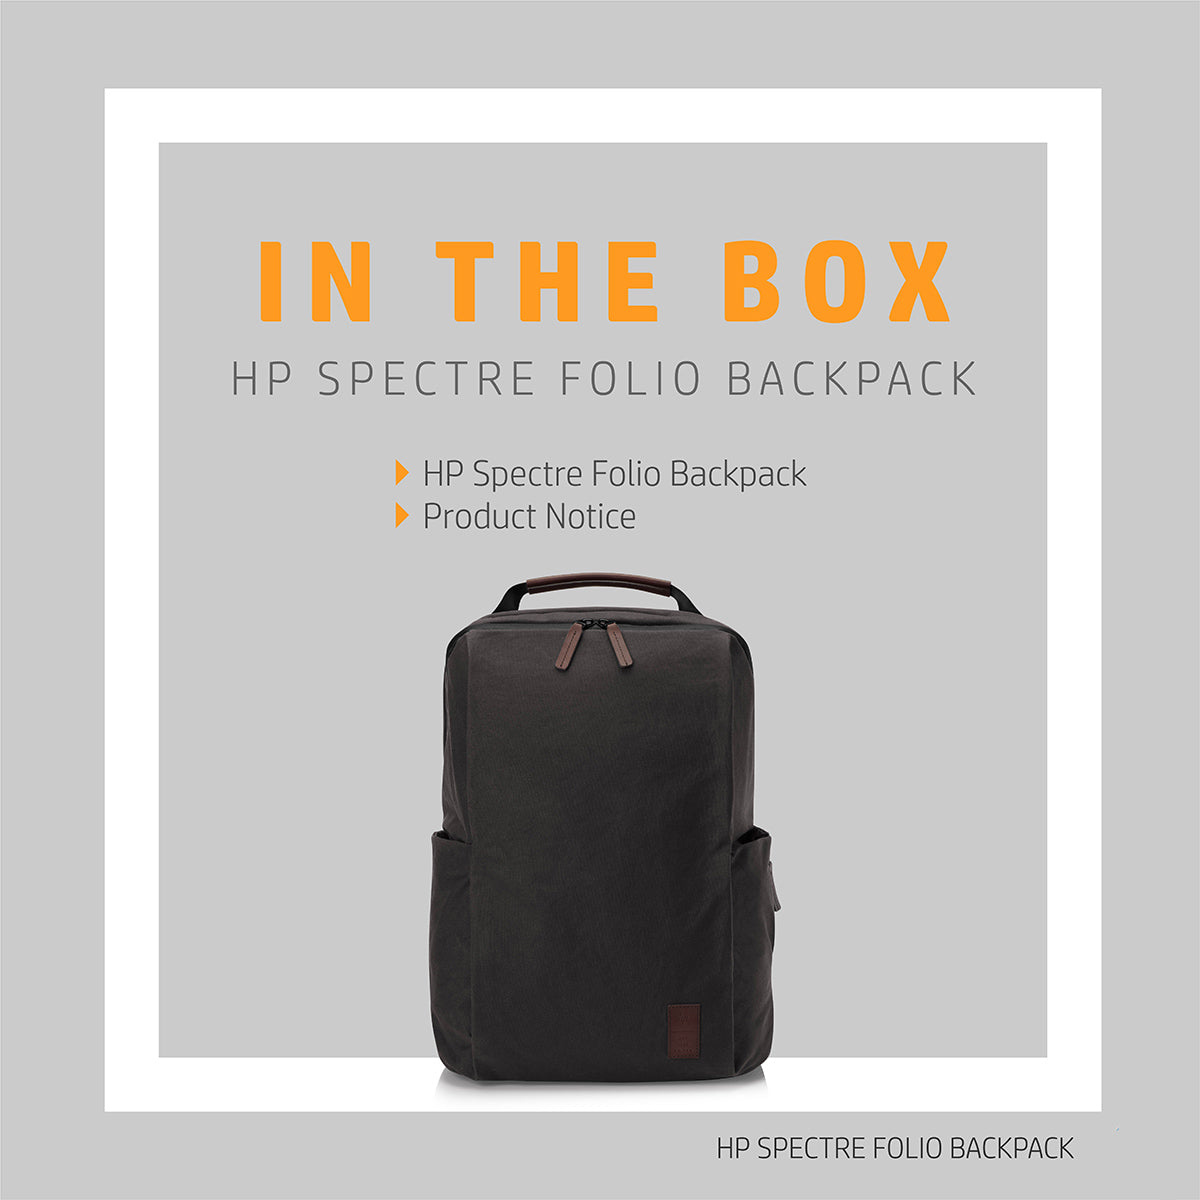 HP Spectre Folio Backpack for 15.6 Inch Laptops with RFID Pockets and Water Resistant Material